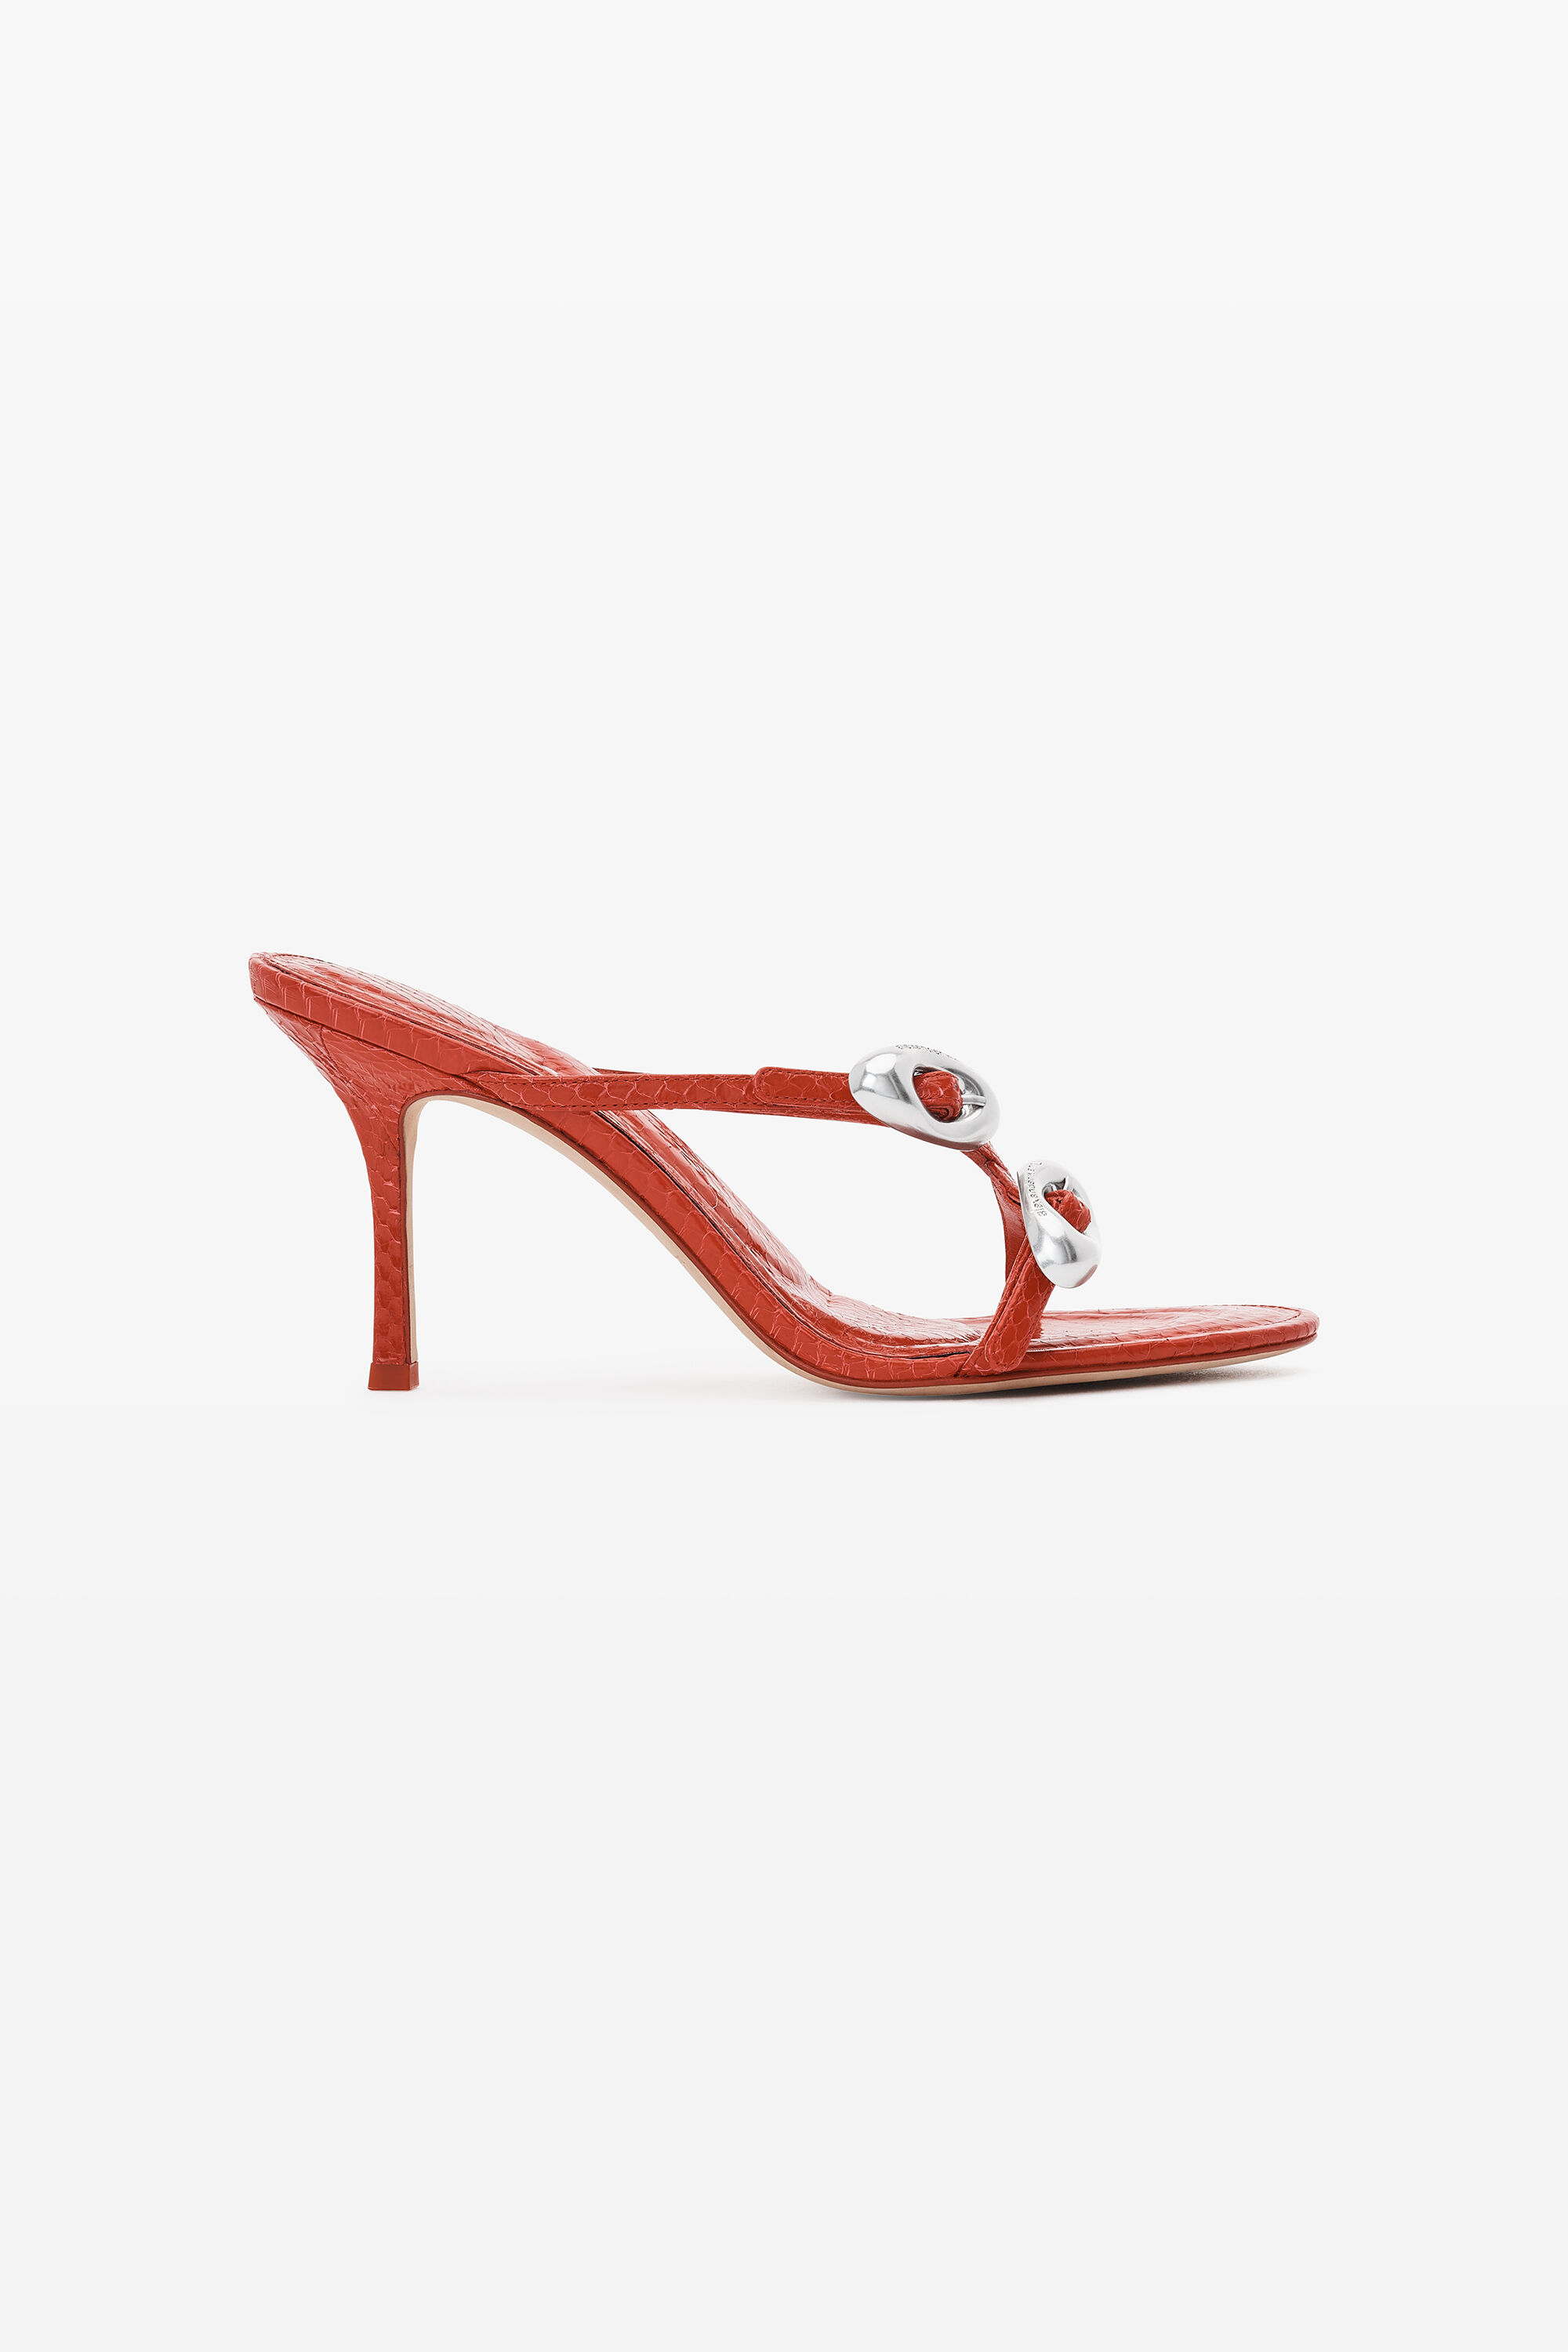 dome 85 water snake strappy slide sandal in BRIGHT RED 